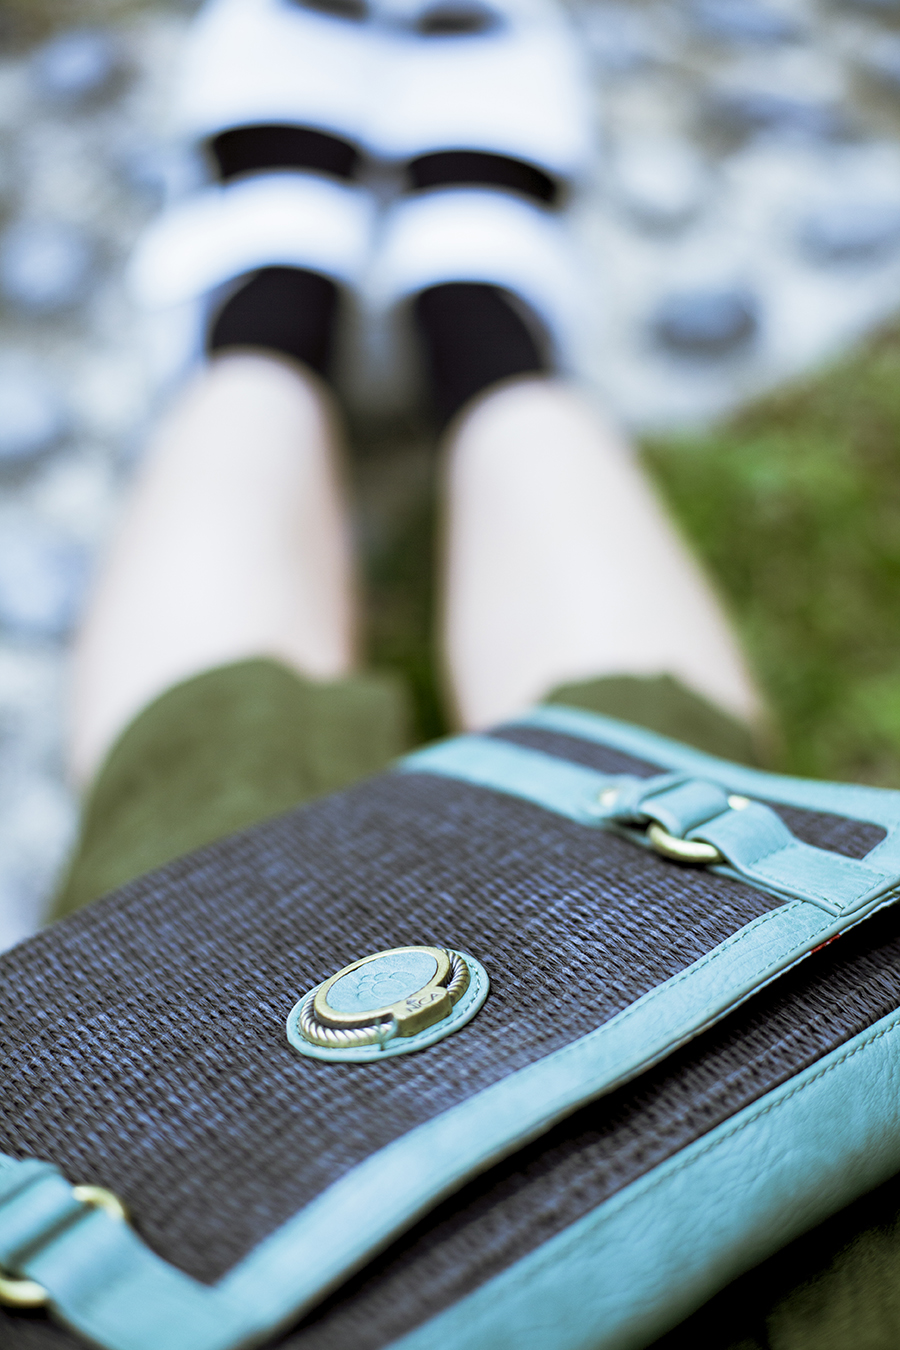 Green outfit: Nica green clutch.